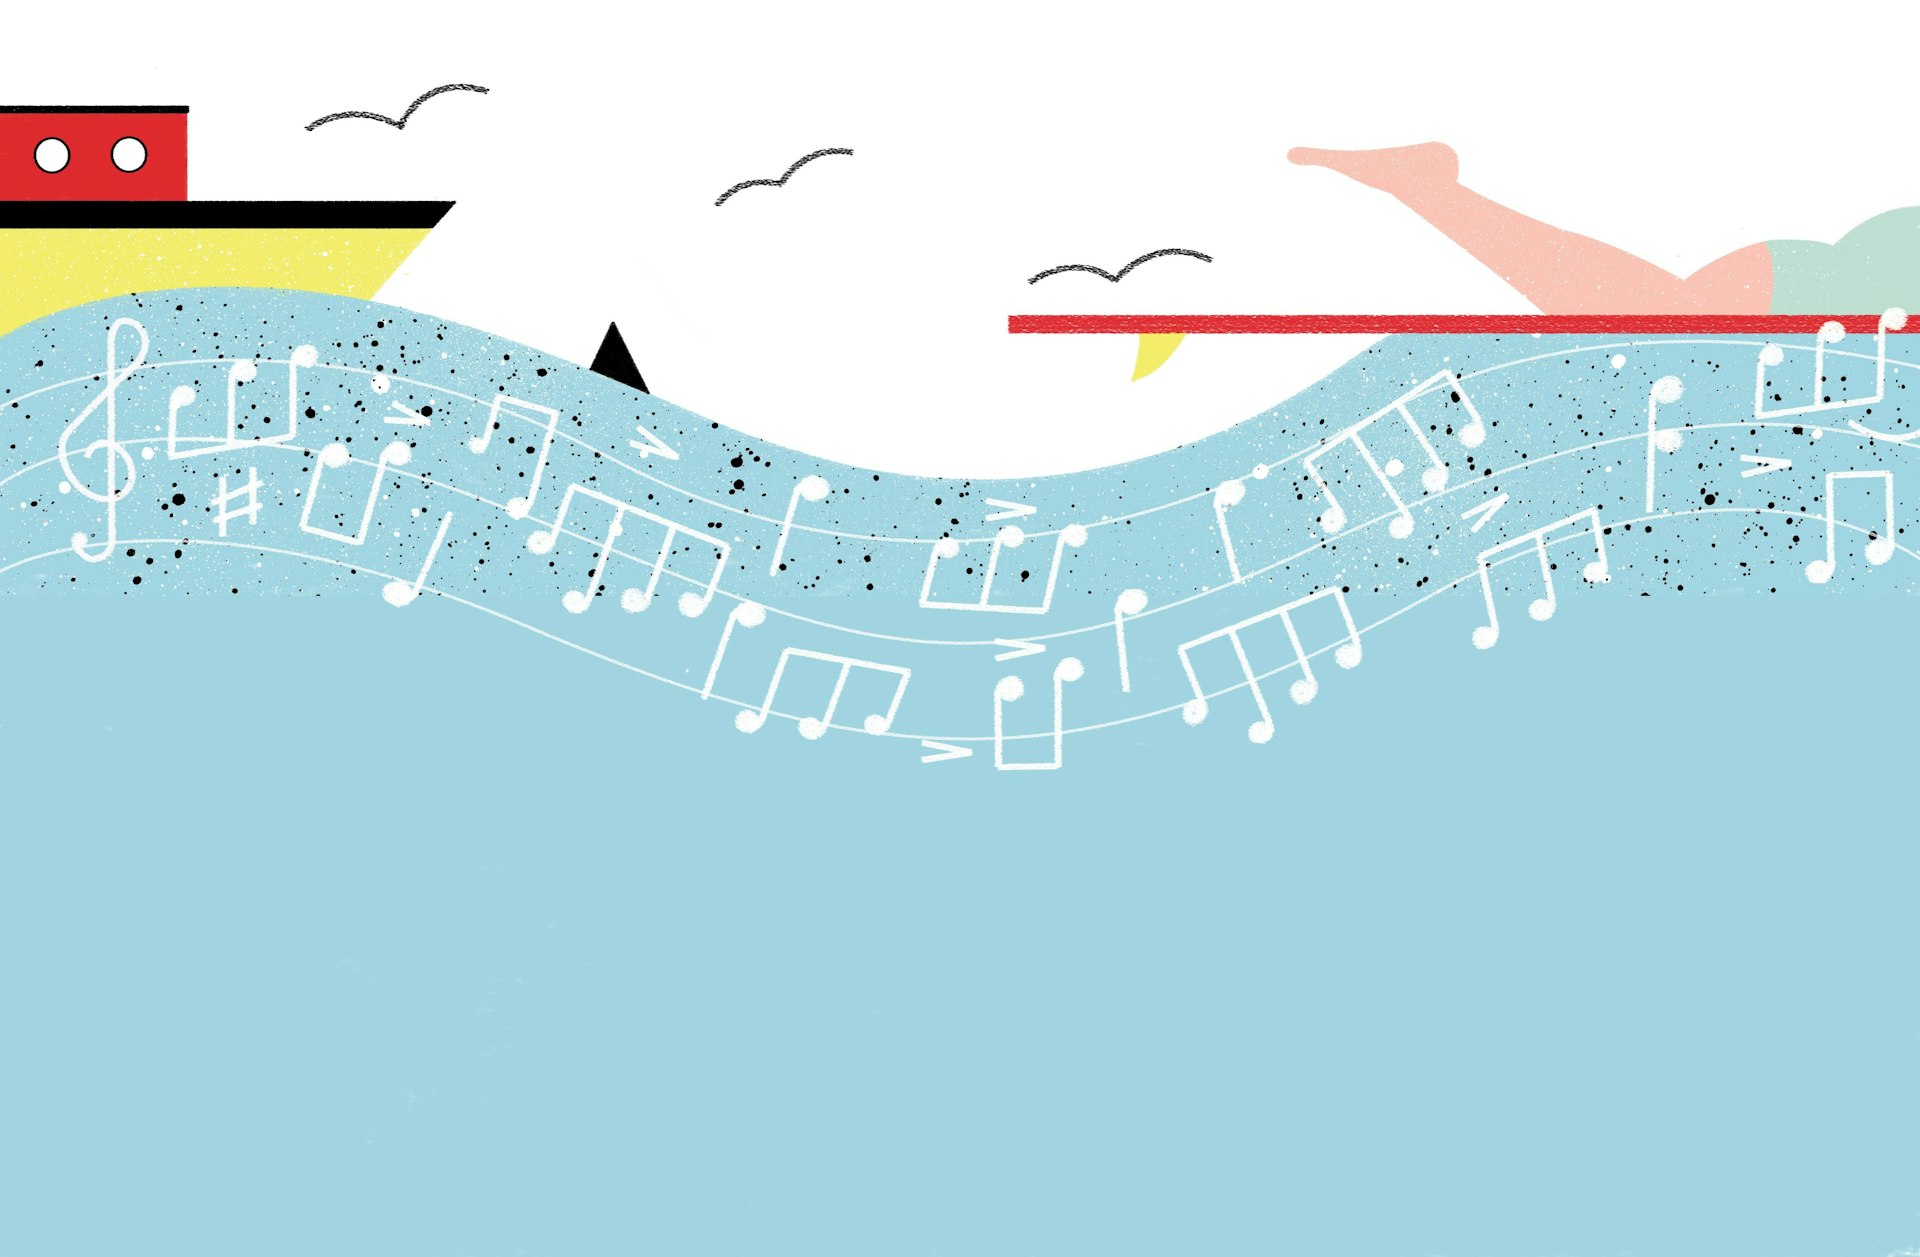 The strange, intimate relationship between surfing and music